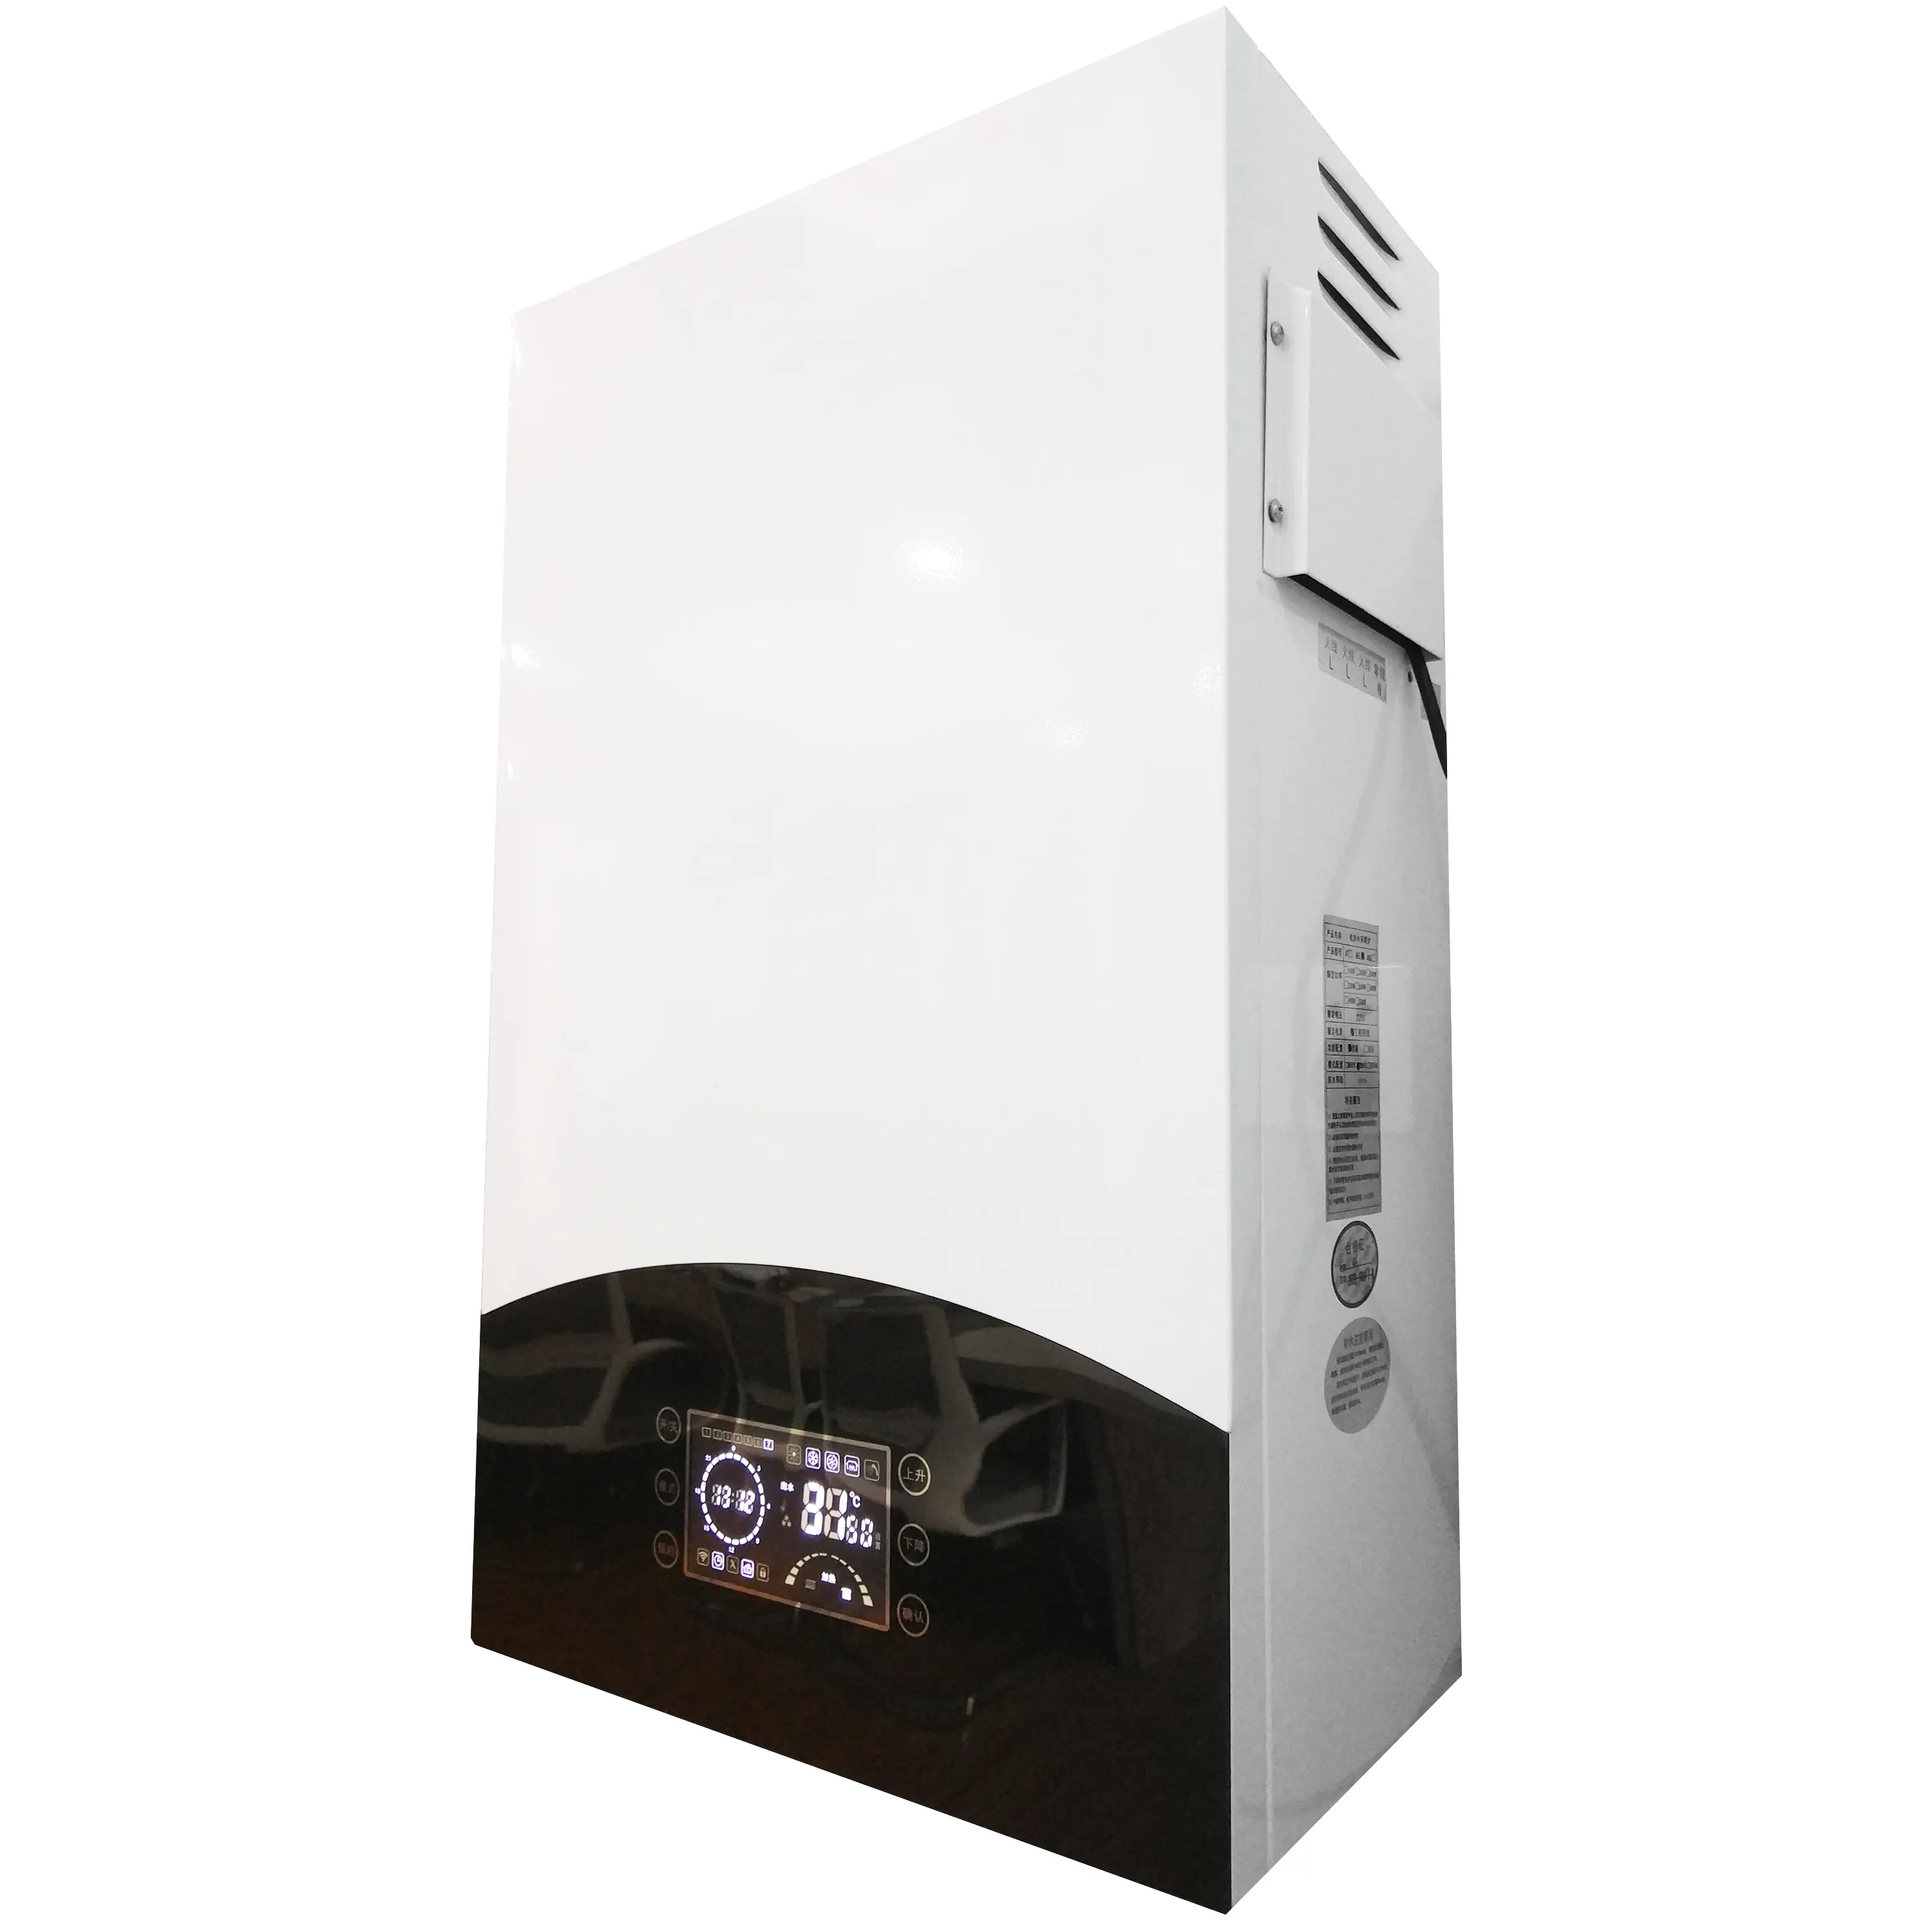 12KW-S-16 New design wall mounted electric boiler with remote control for radiator